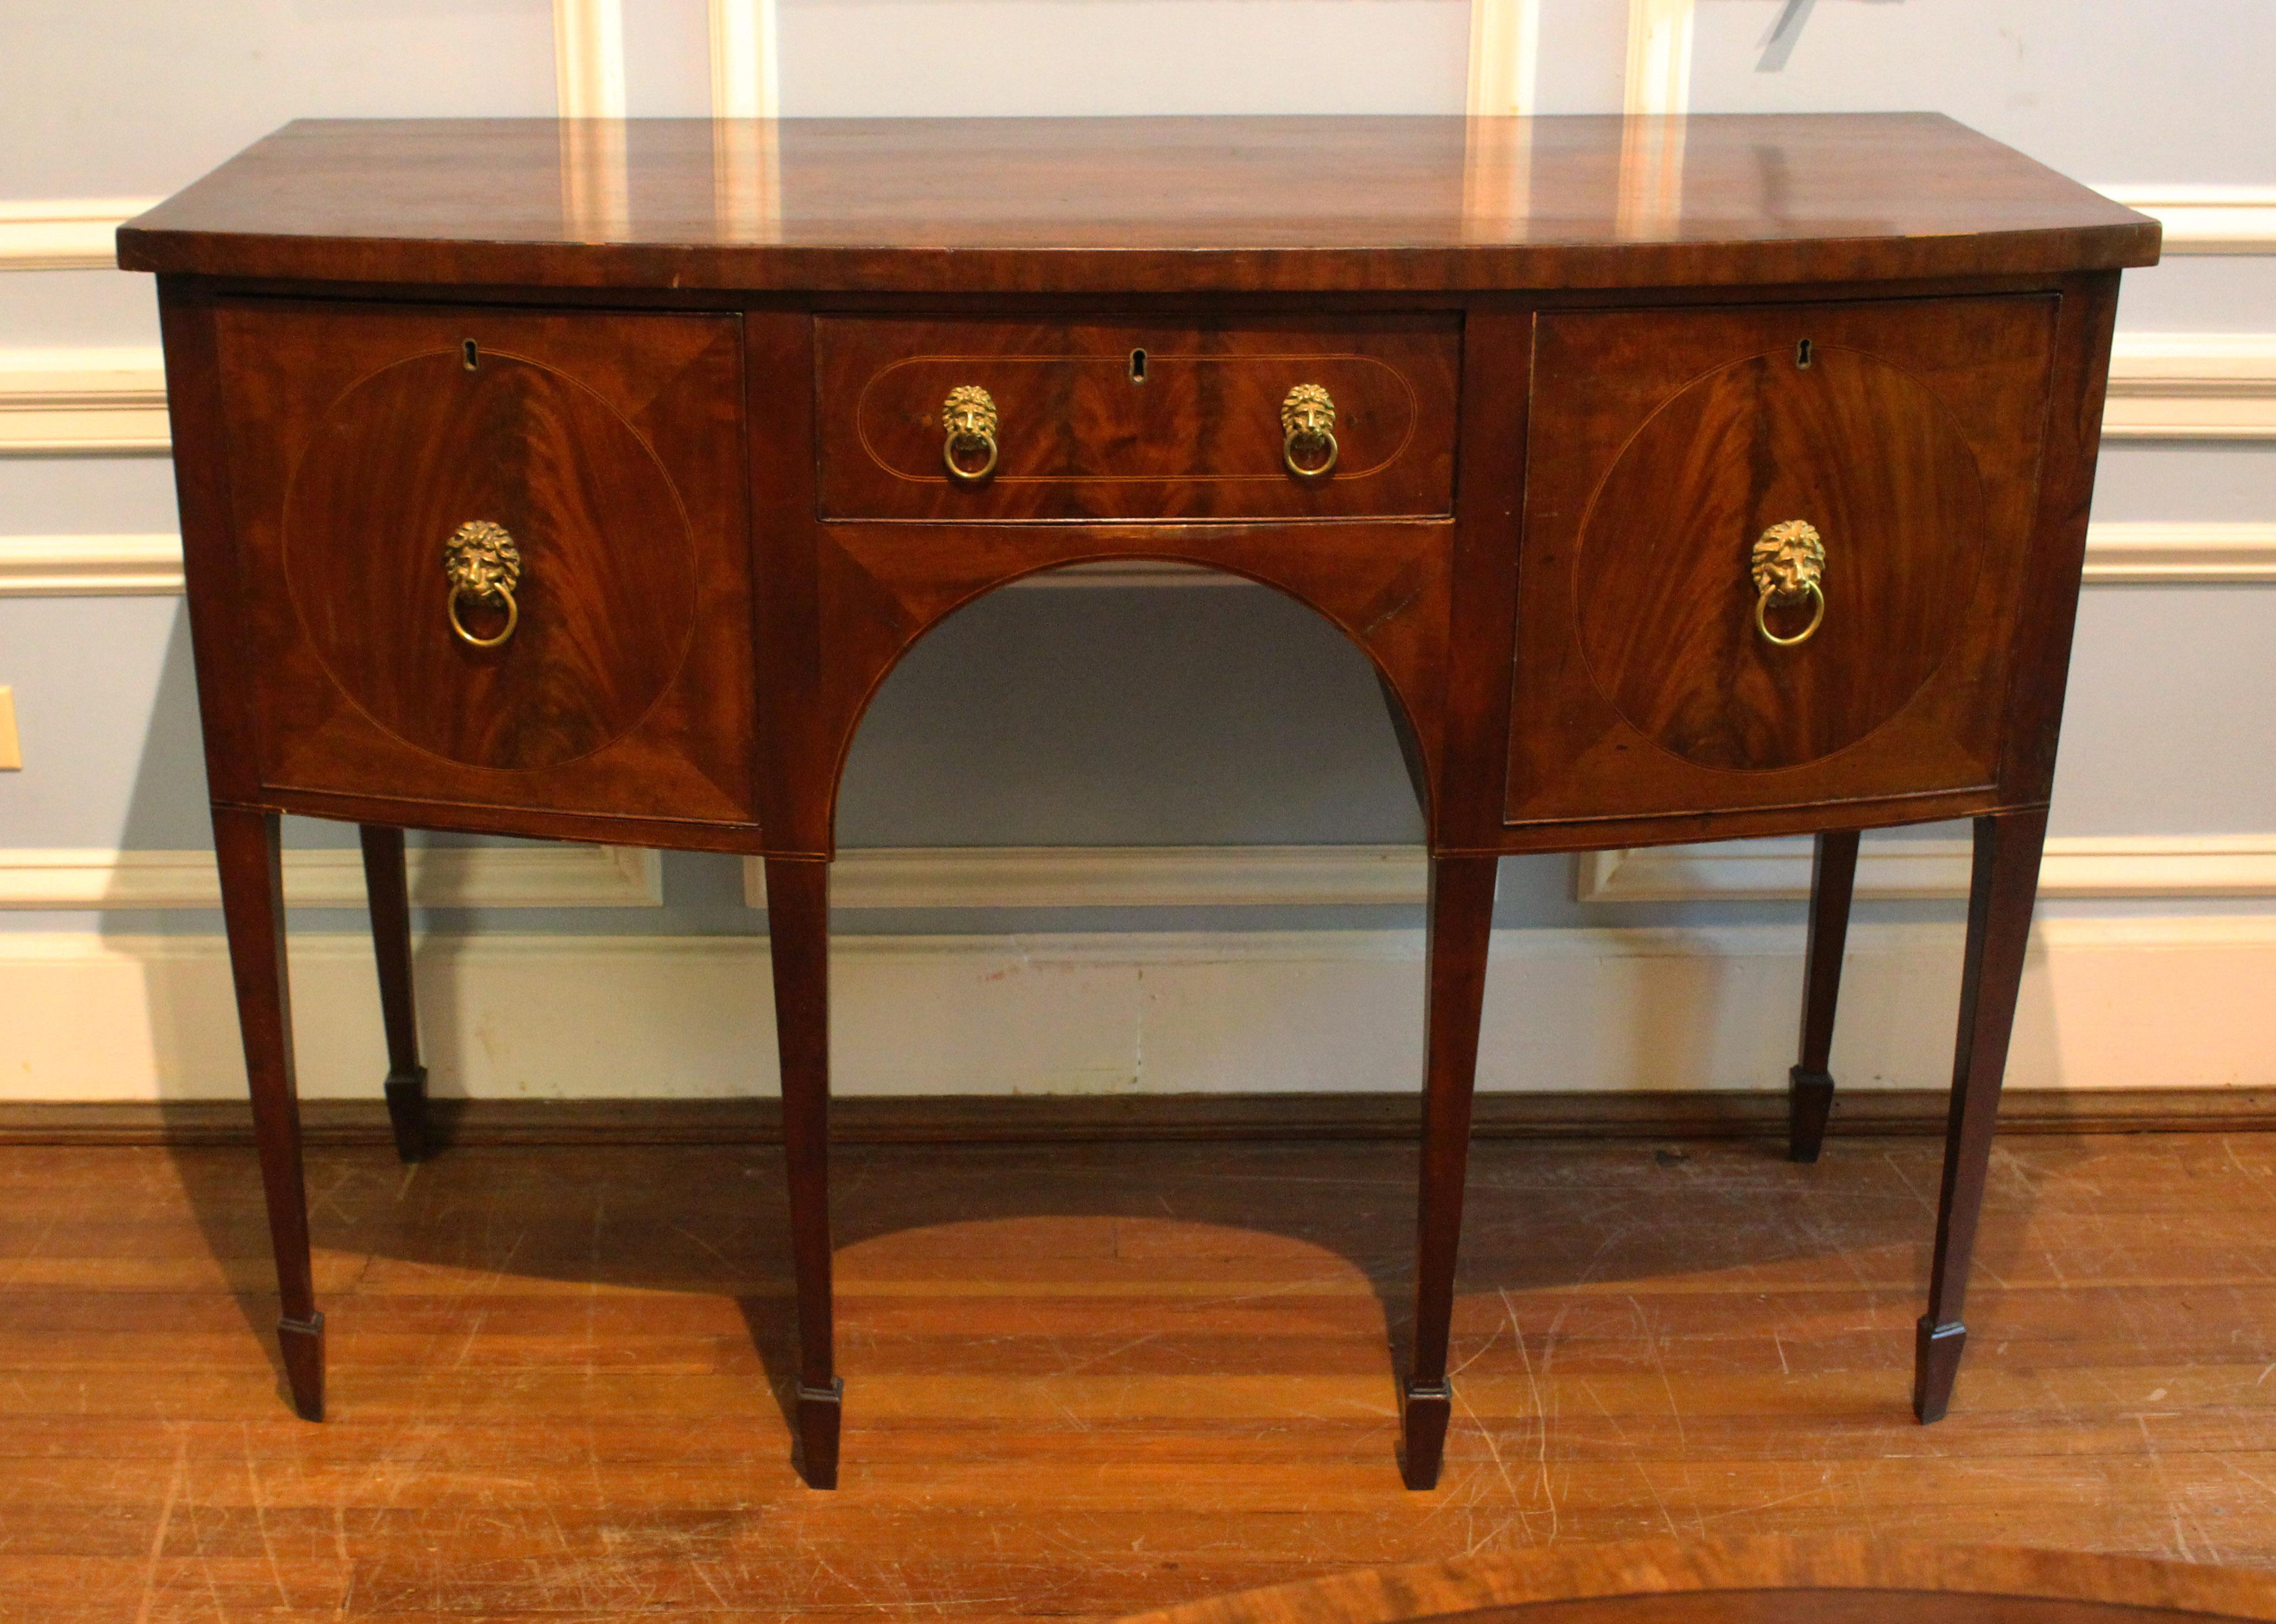 Circa 1770-90 George III Small Bowfront Sideboard In Good Condition For Sale In Chapel Hill, NC